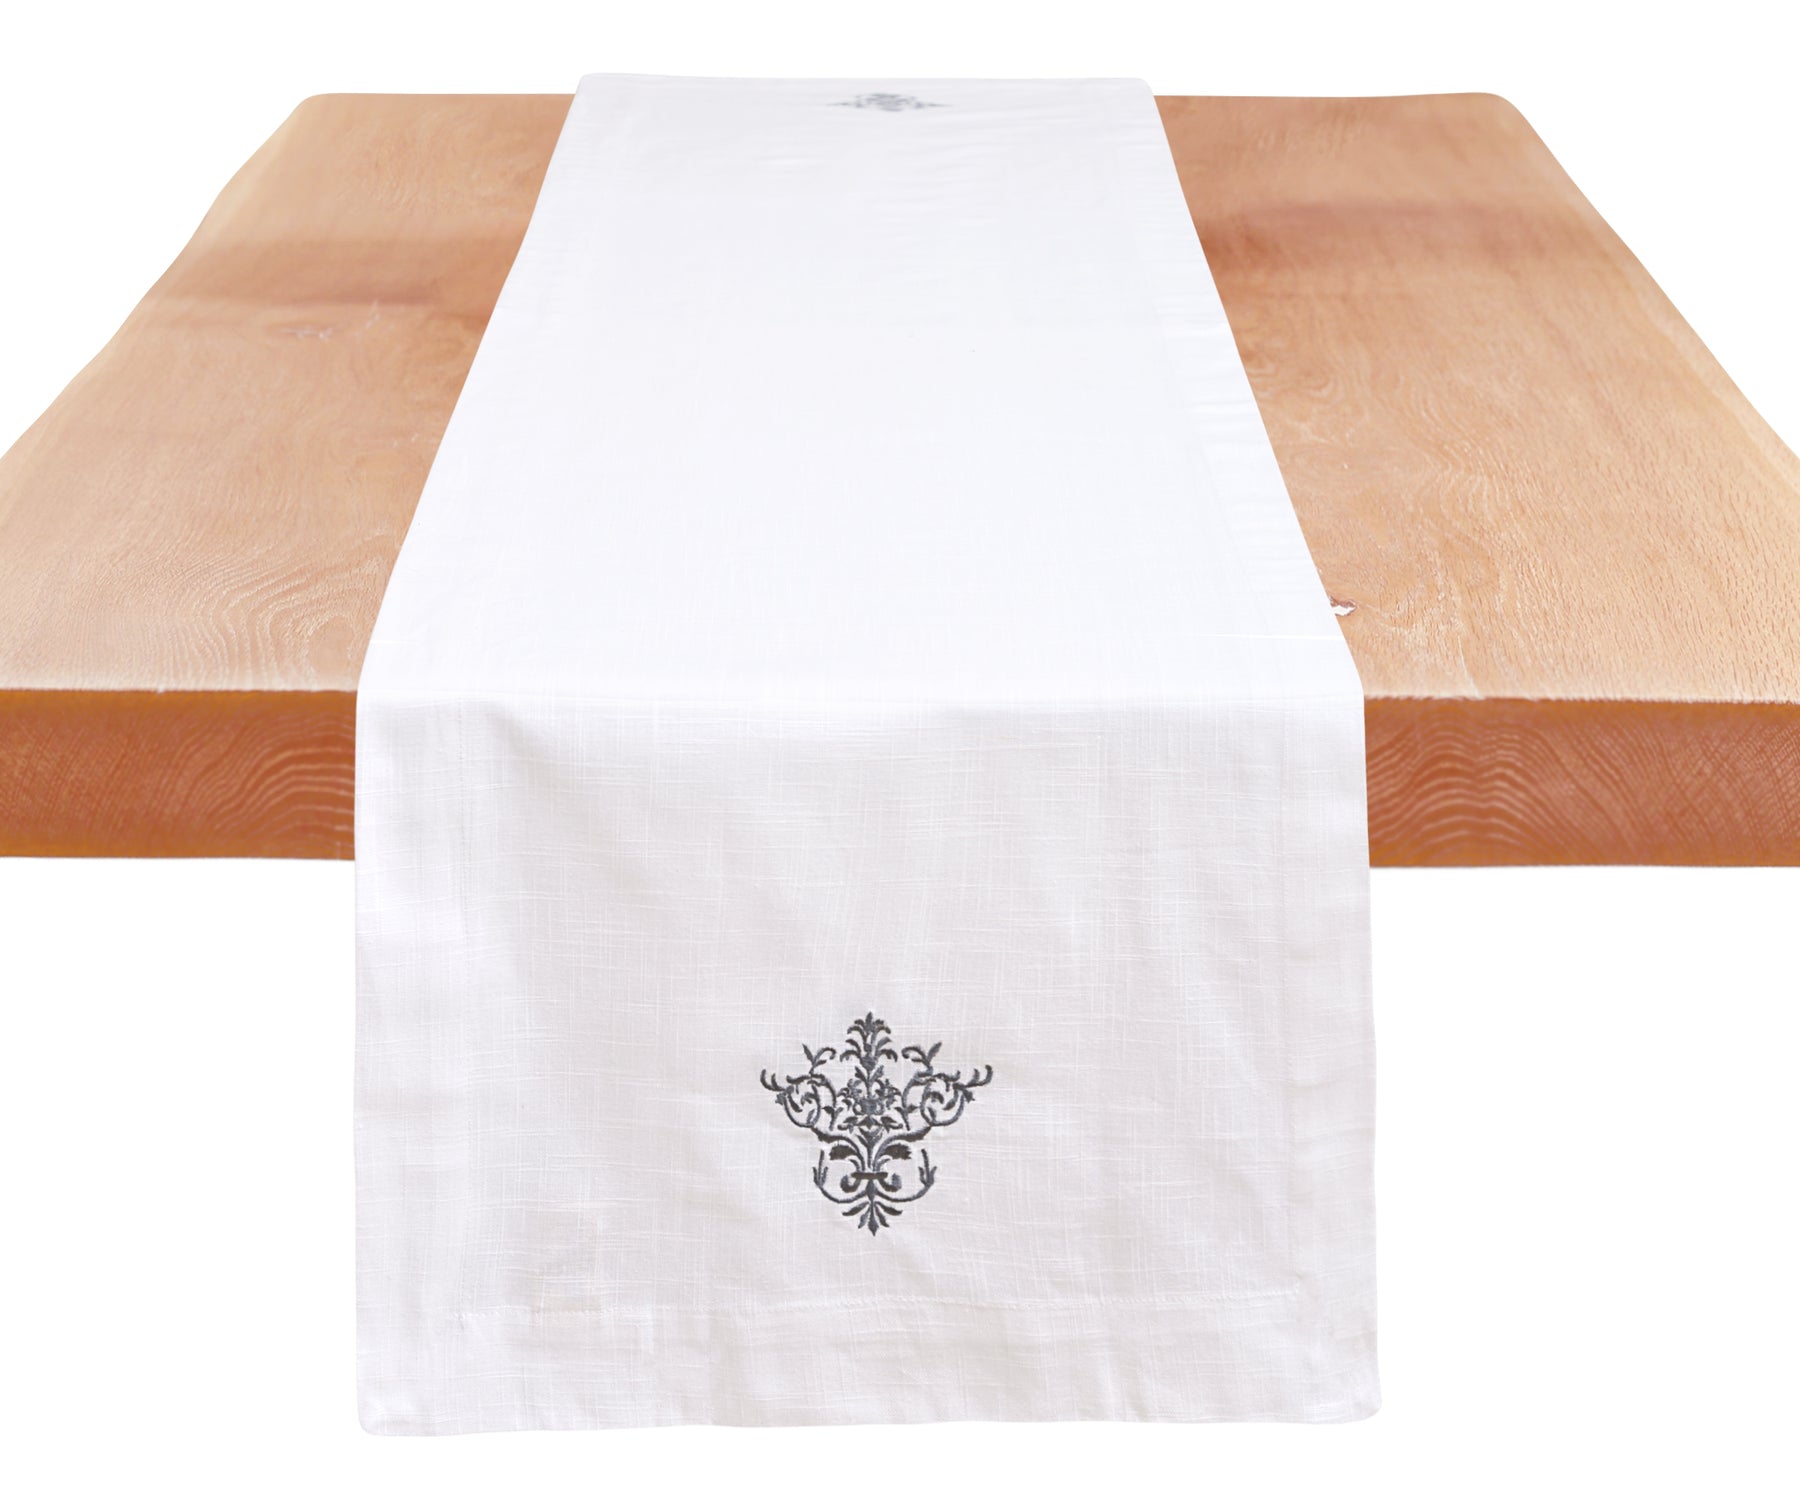 long table runner are made up of pure cotton fabric, gray table runner, modern table runner.